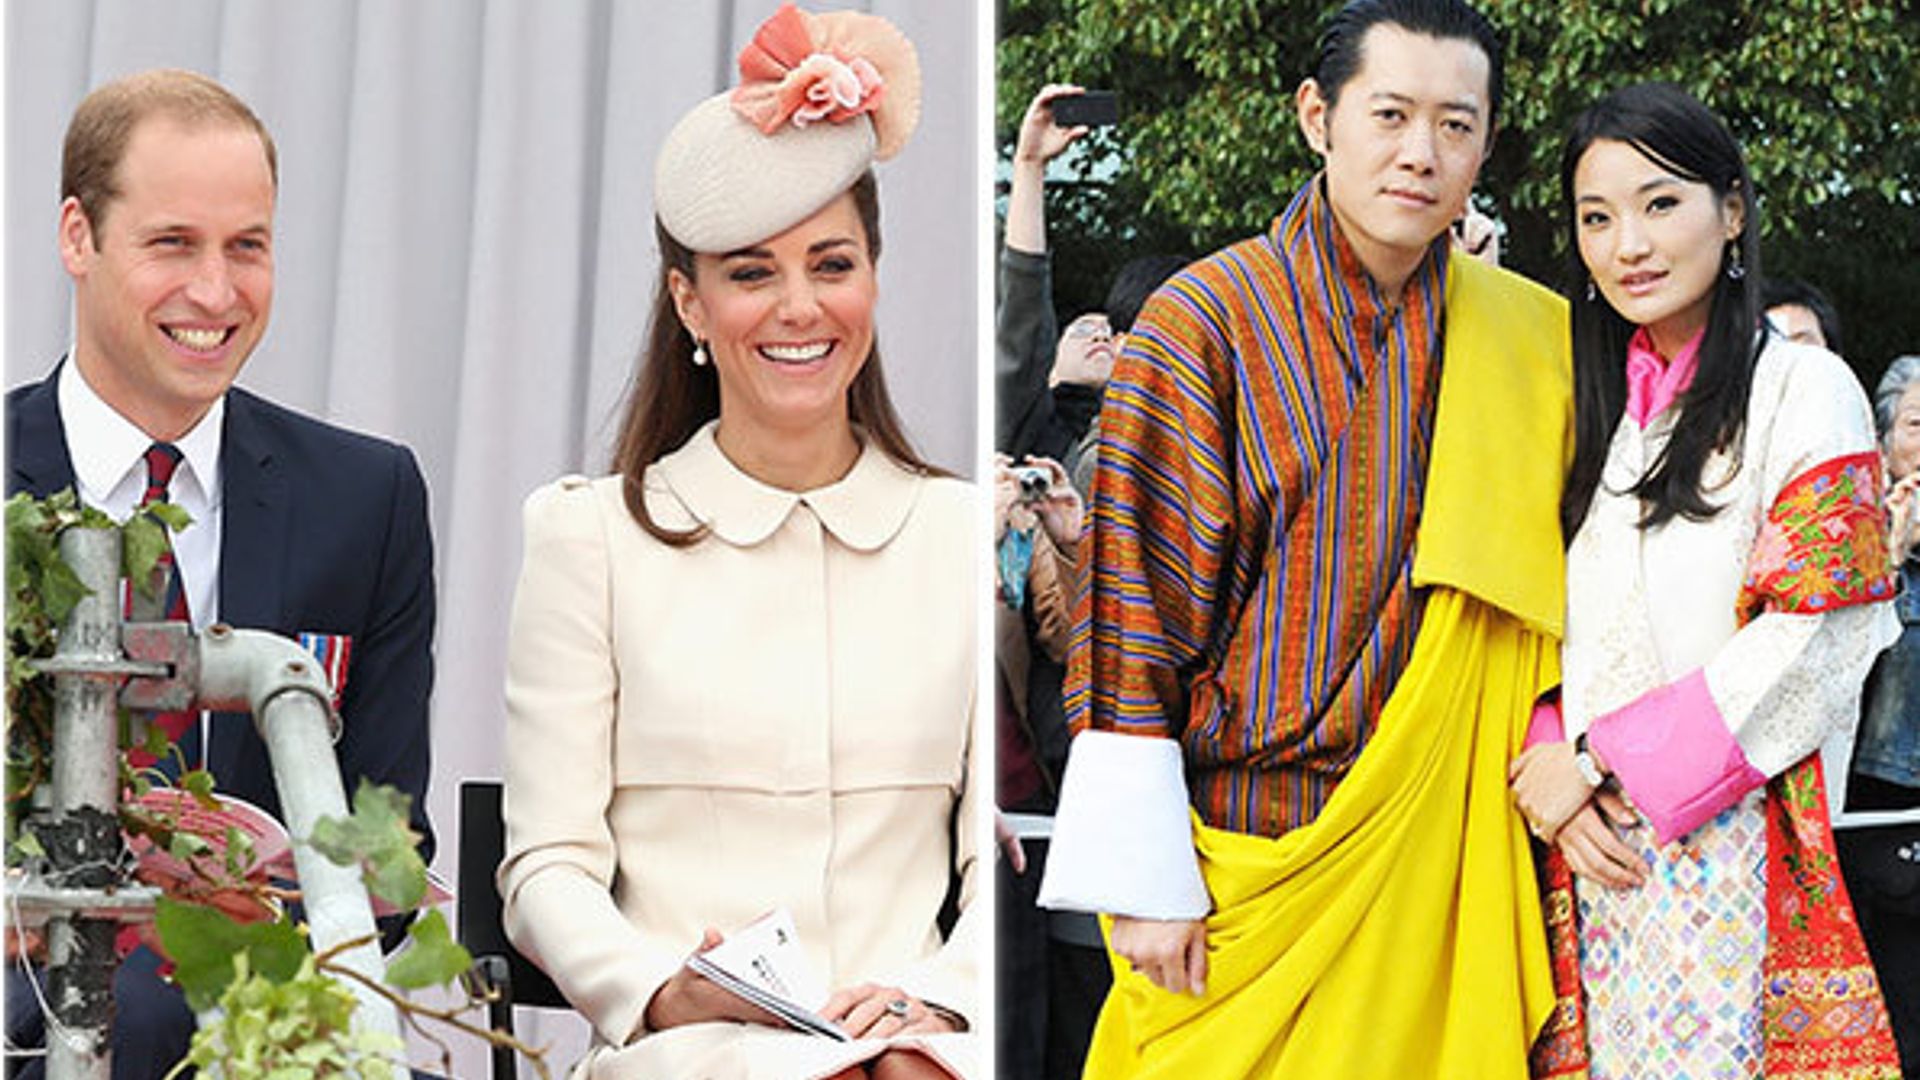 The Duke and Duchess of Cambridge to meet the King and Queen of Bhutan (the Will and Kate of the Himalayas)